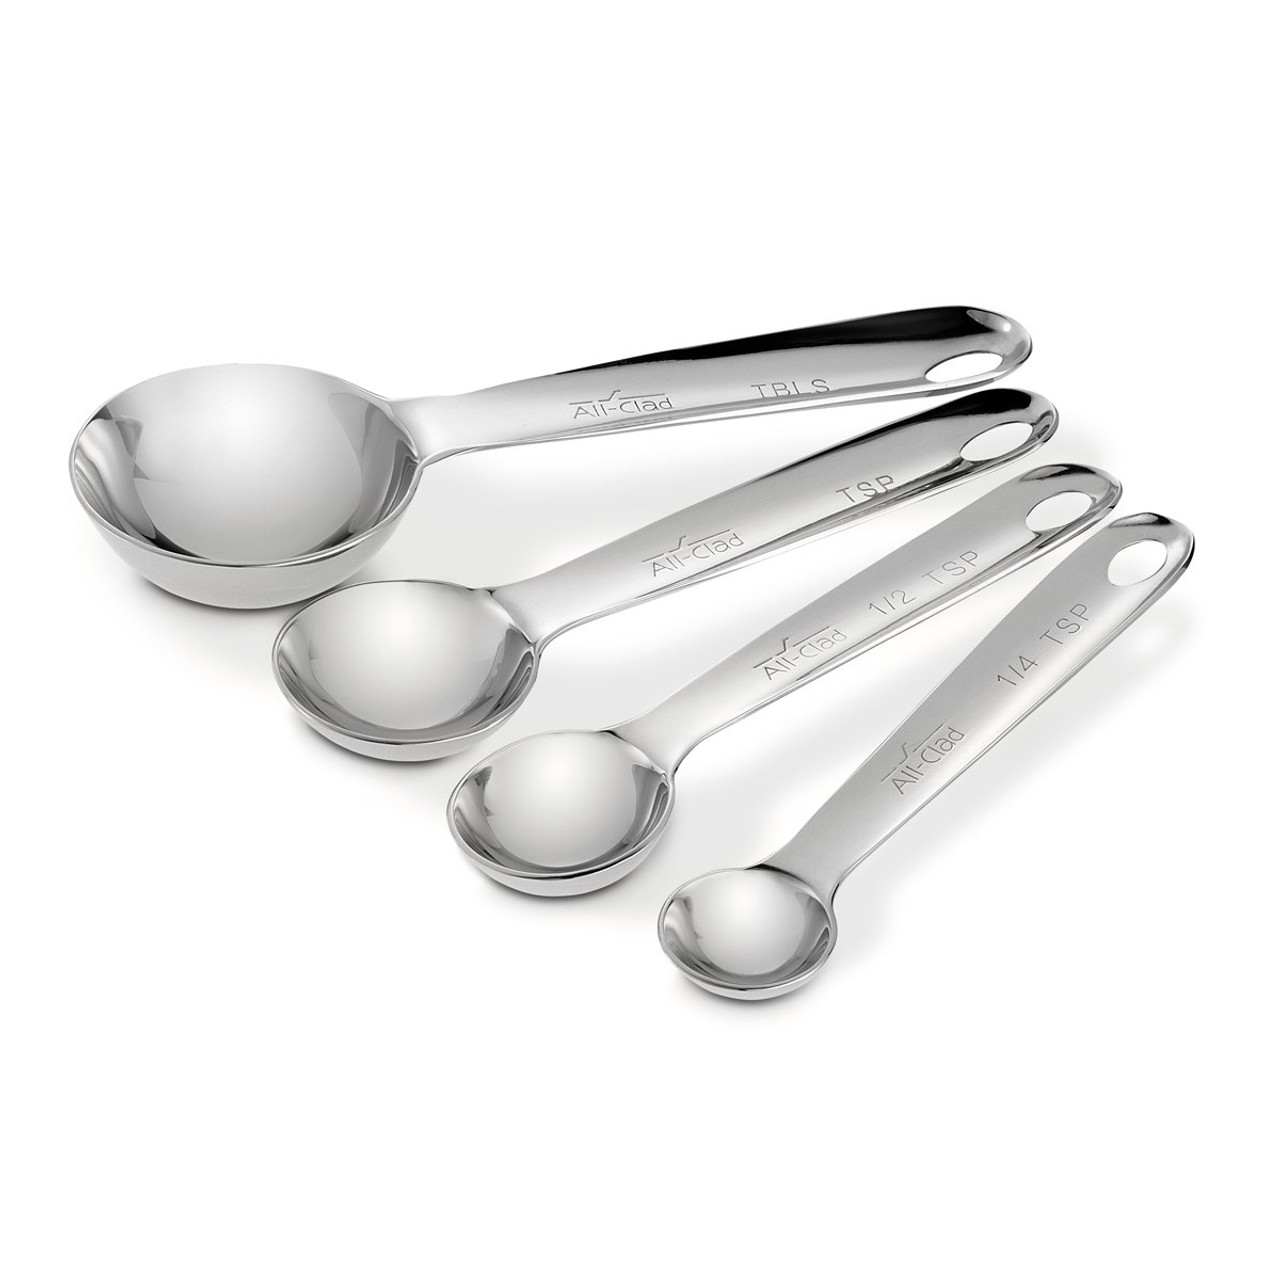 https://cdn11.bigcommerce.com/s-hccytny0od/images/stencil/1280x1280/products/1326/3385/all-clad-stainless-steel-measuring-spoon-set__30440.1591969206.jpg?c=2?imbypass=on